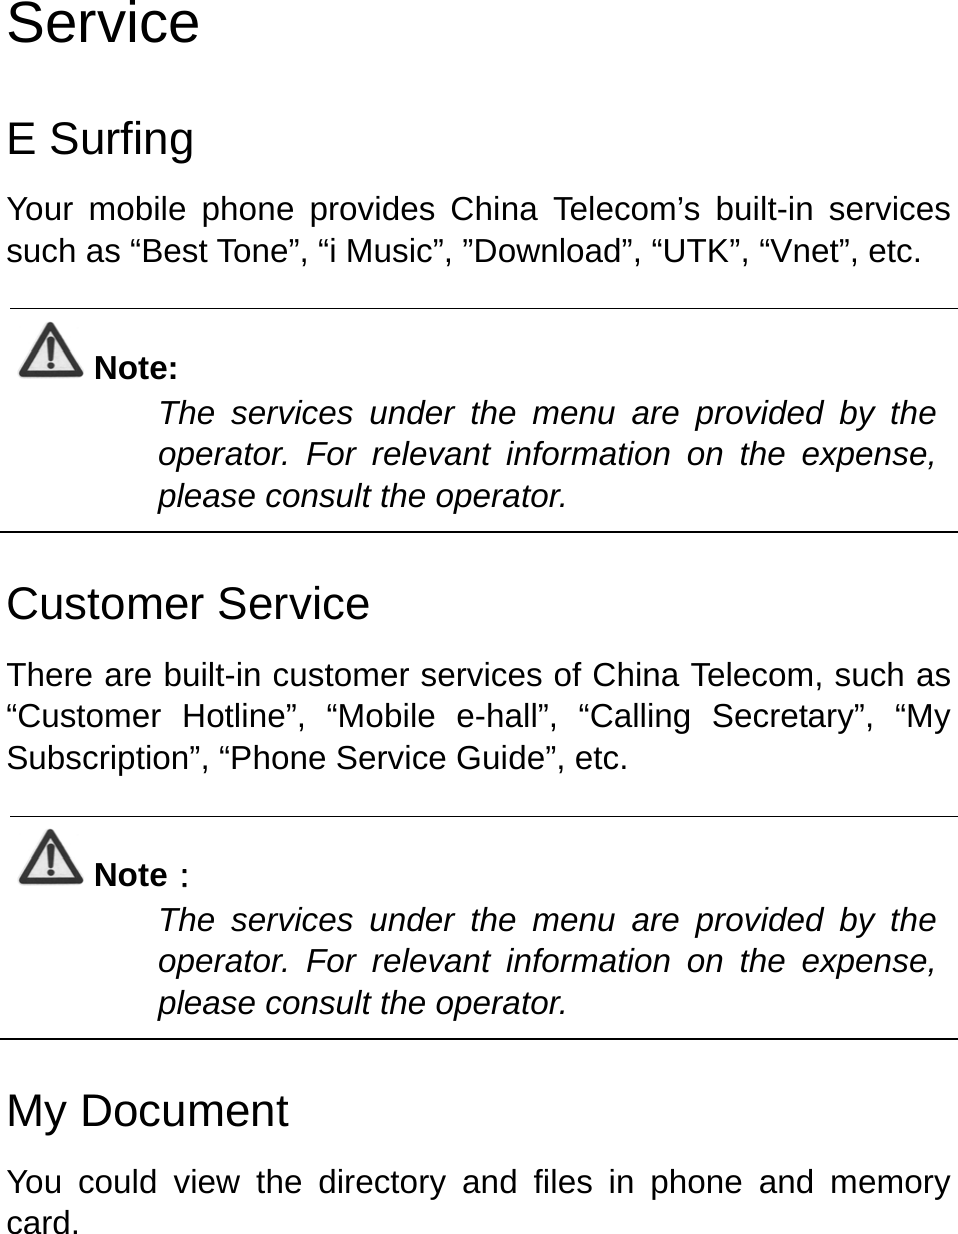   Service E Surfing Your mobile phone provides China Telecom’s built-in services such as “Best Tone”, “i Music”, ”Download”, “UTK”, “Vnet”, etc.    Note: The services under the menu are provided by the operator. For relevant information on the expense, please consult the operator.    Customer Service There are built-in customer services of China Telecom, such as “Customer Hotline”, “Mobile e-hall”, “Calling Secretary”, “My  Subscription”, “Phone Service Guide”, etc.  Note： The services under the menu are provided by the operator. For relevant information on the expense, please consult the operator.  My Document You could view the directory and files in phone and memory card. 